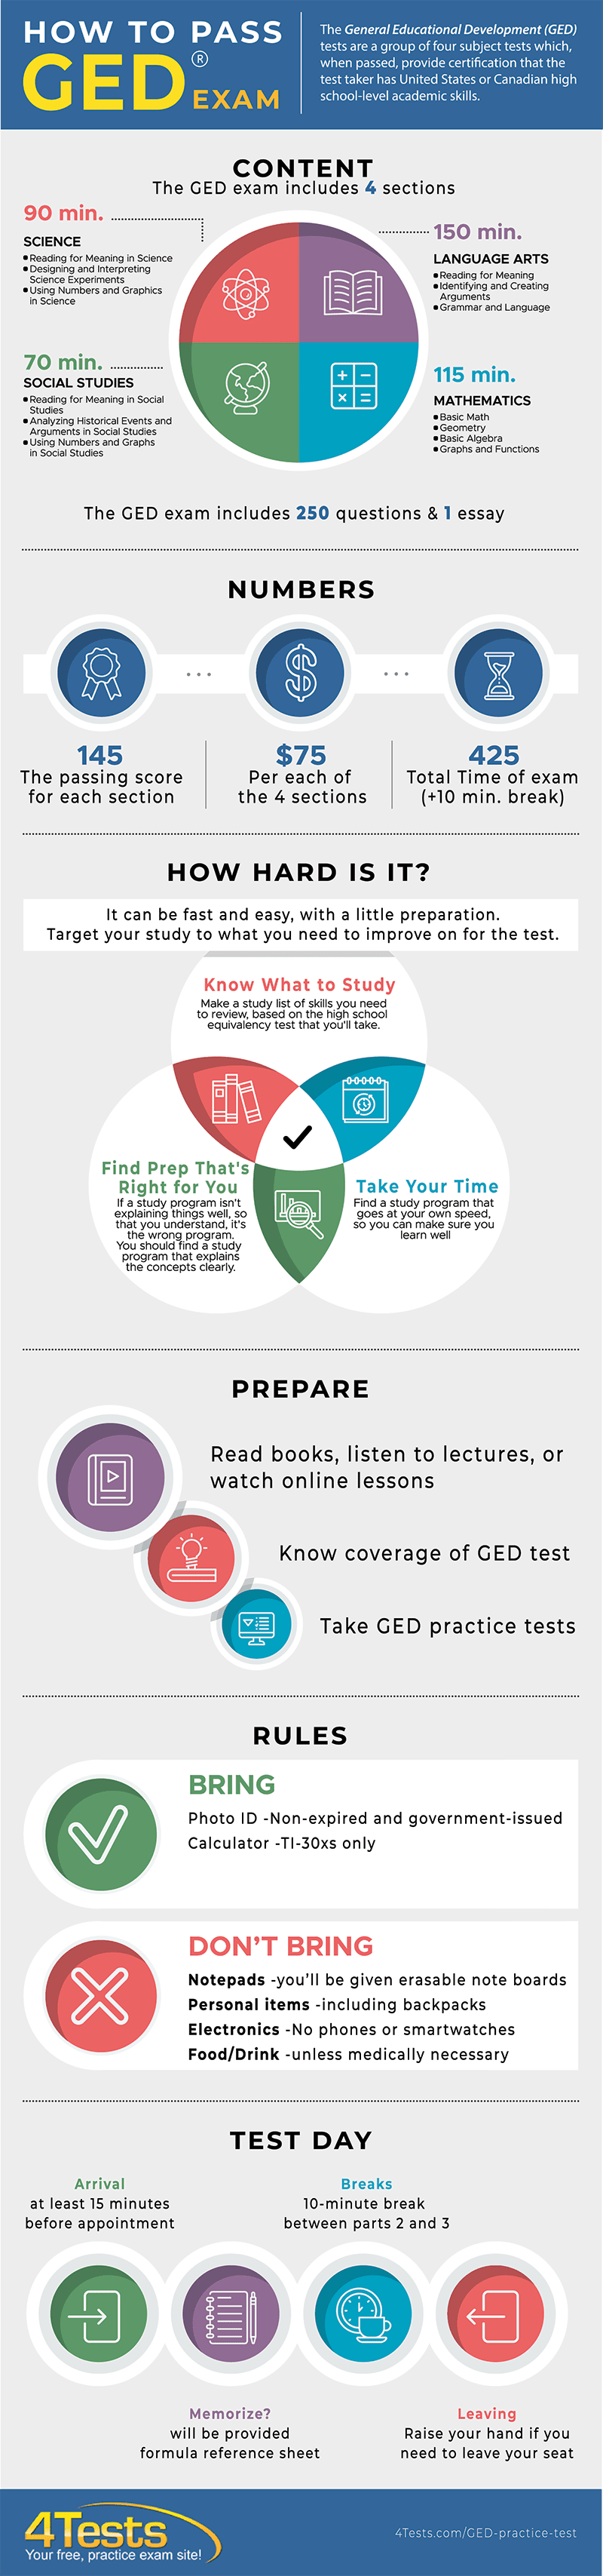 free-ged-practice-tests-resources-exam-tips